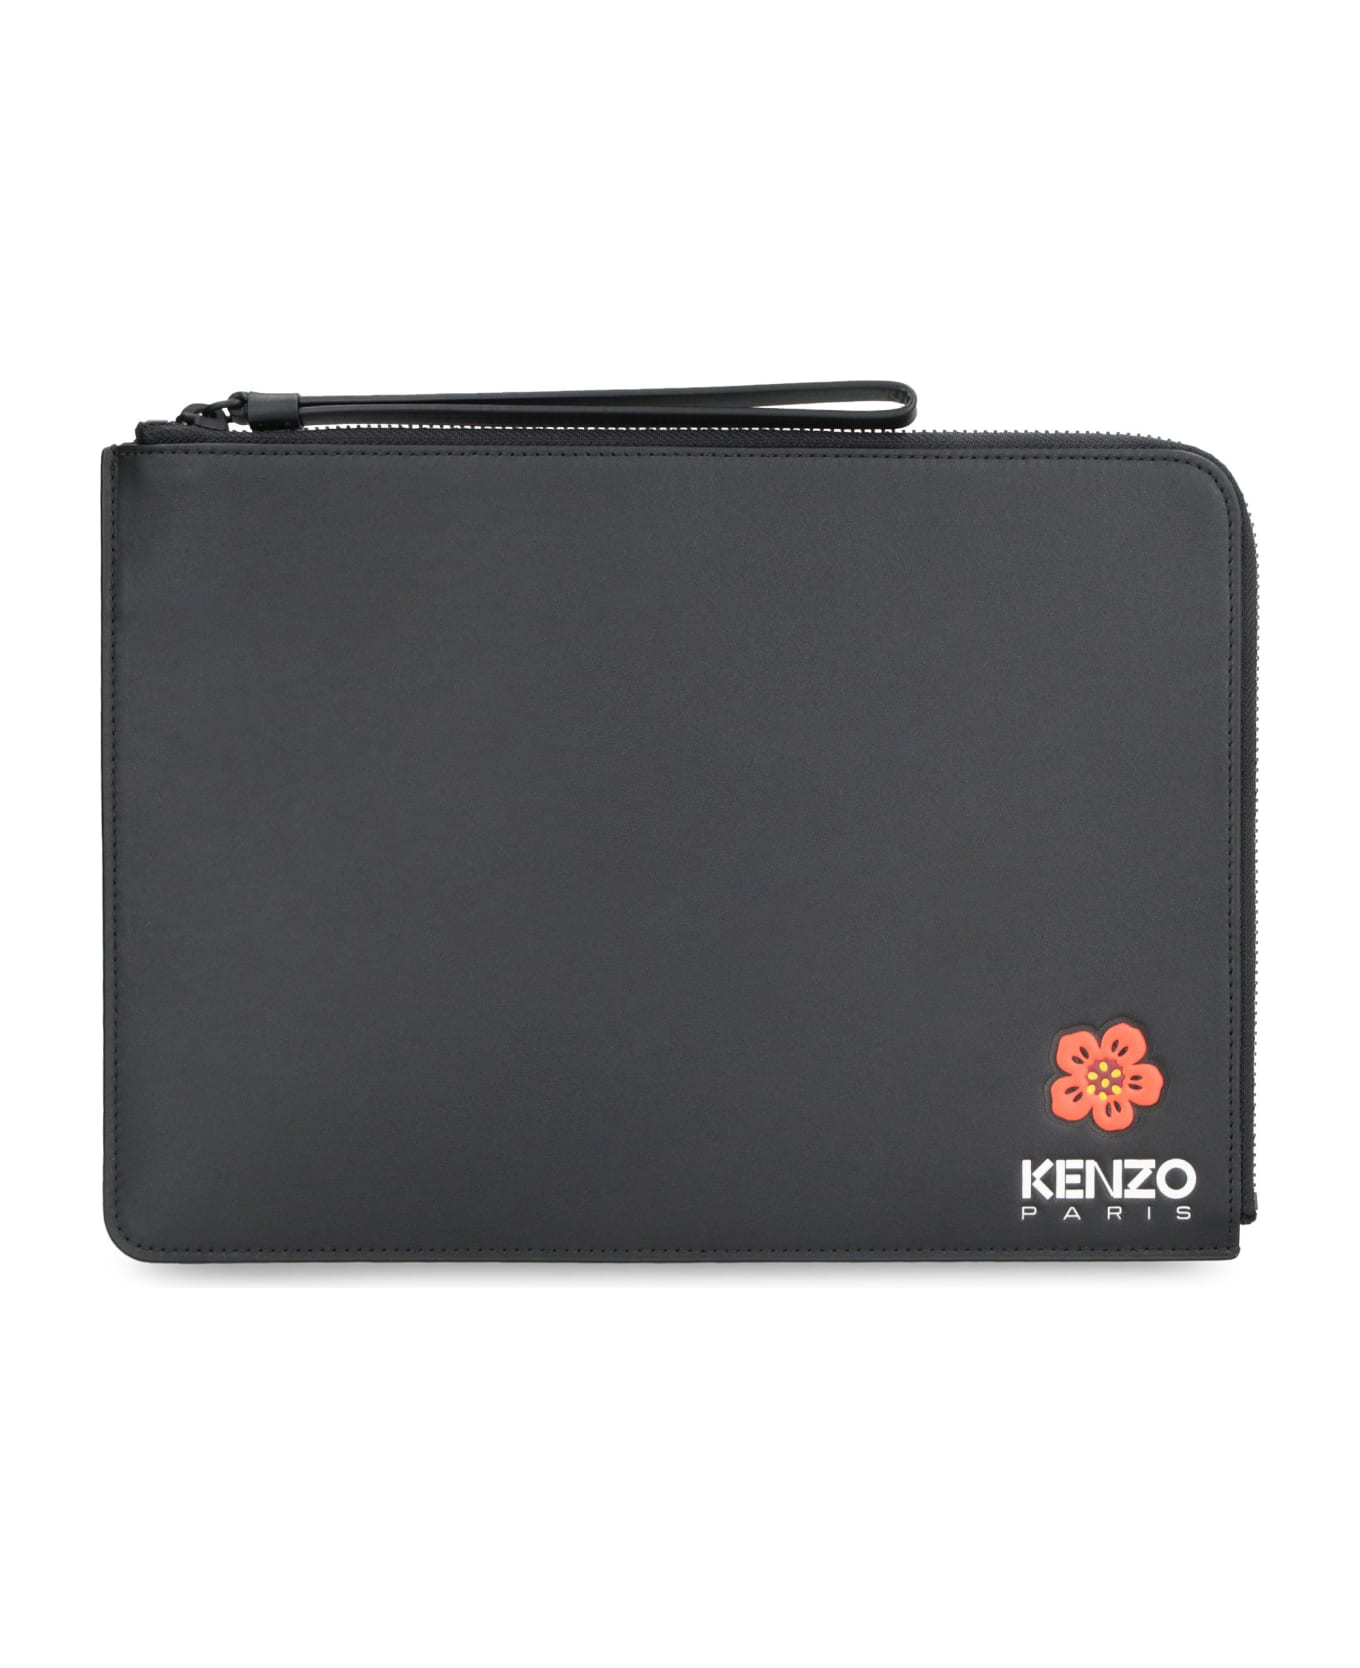 Kenzo Leather Flat Pouch - black バッグ